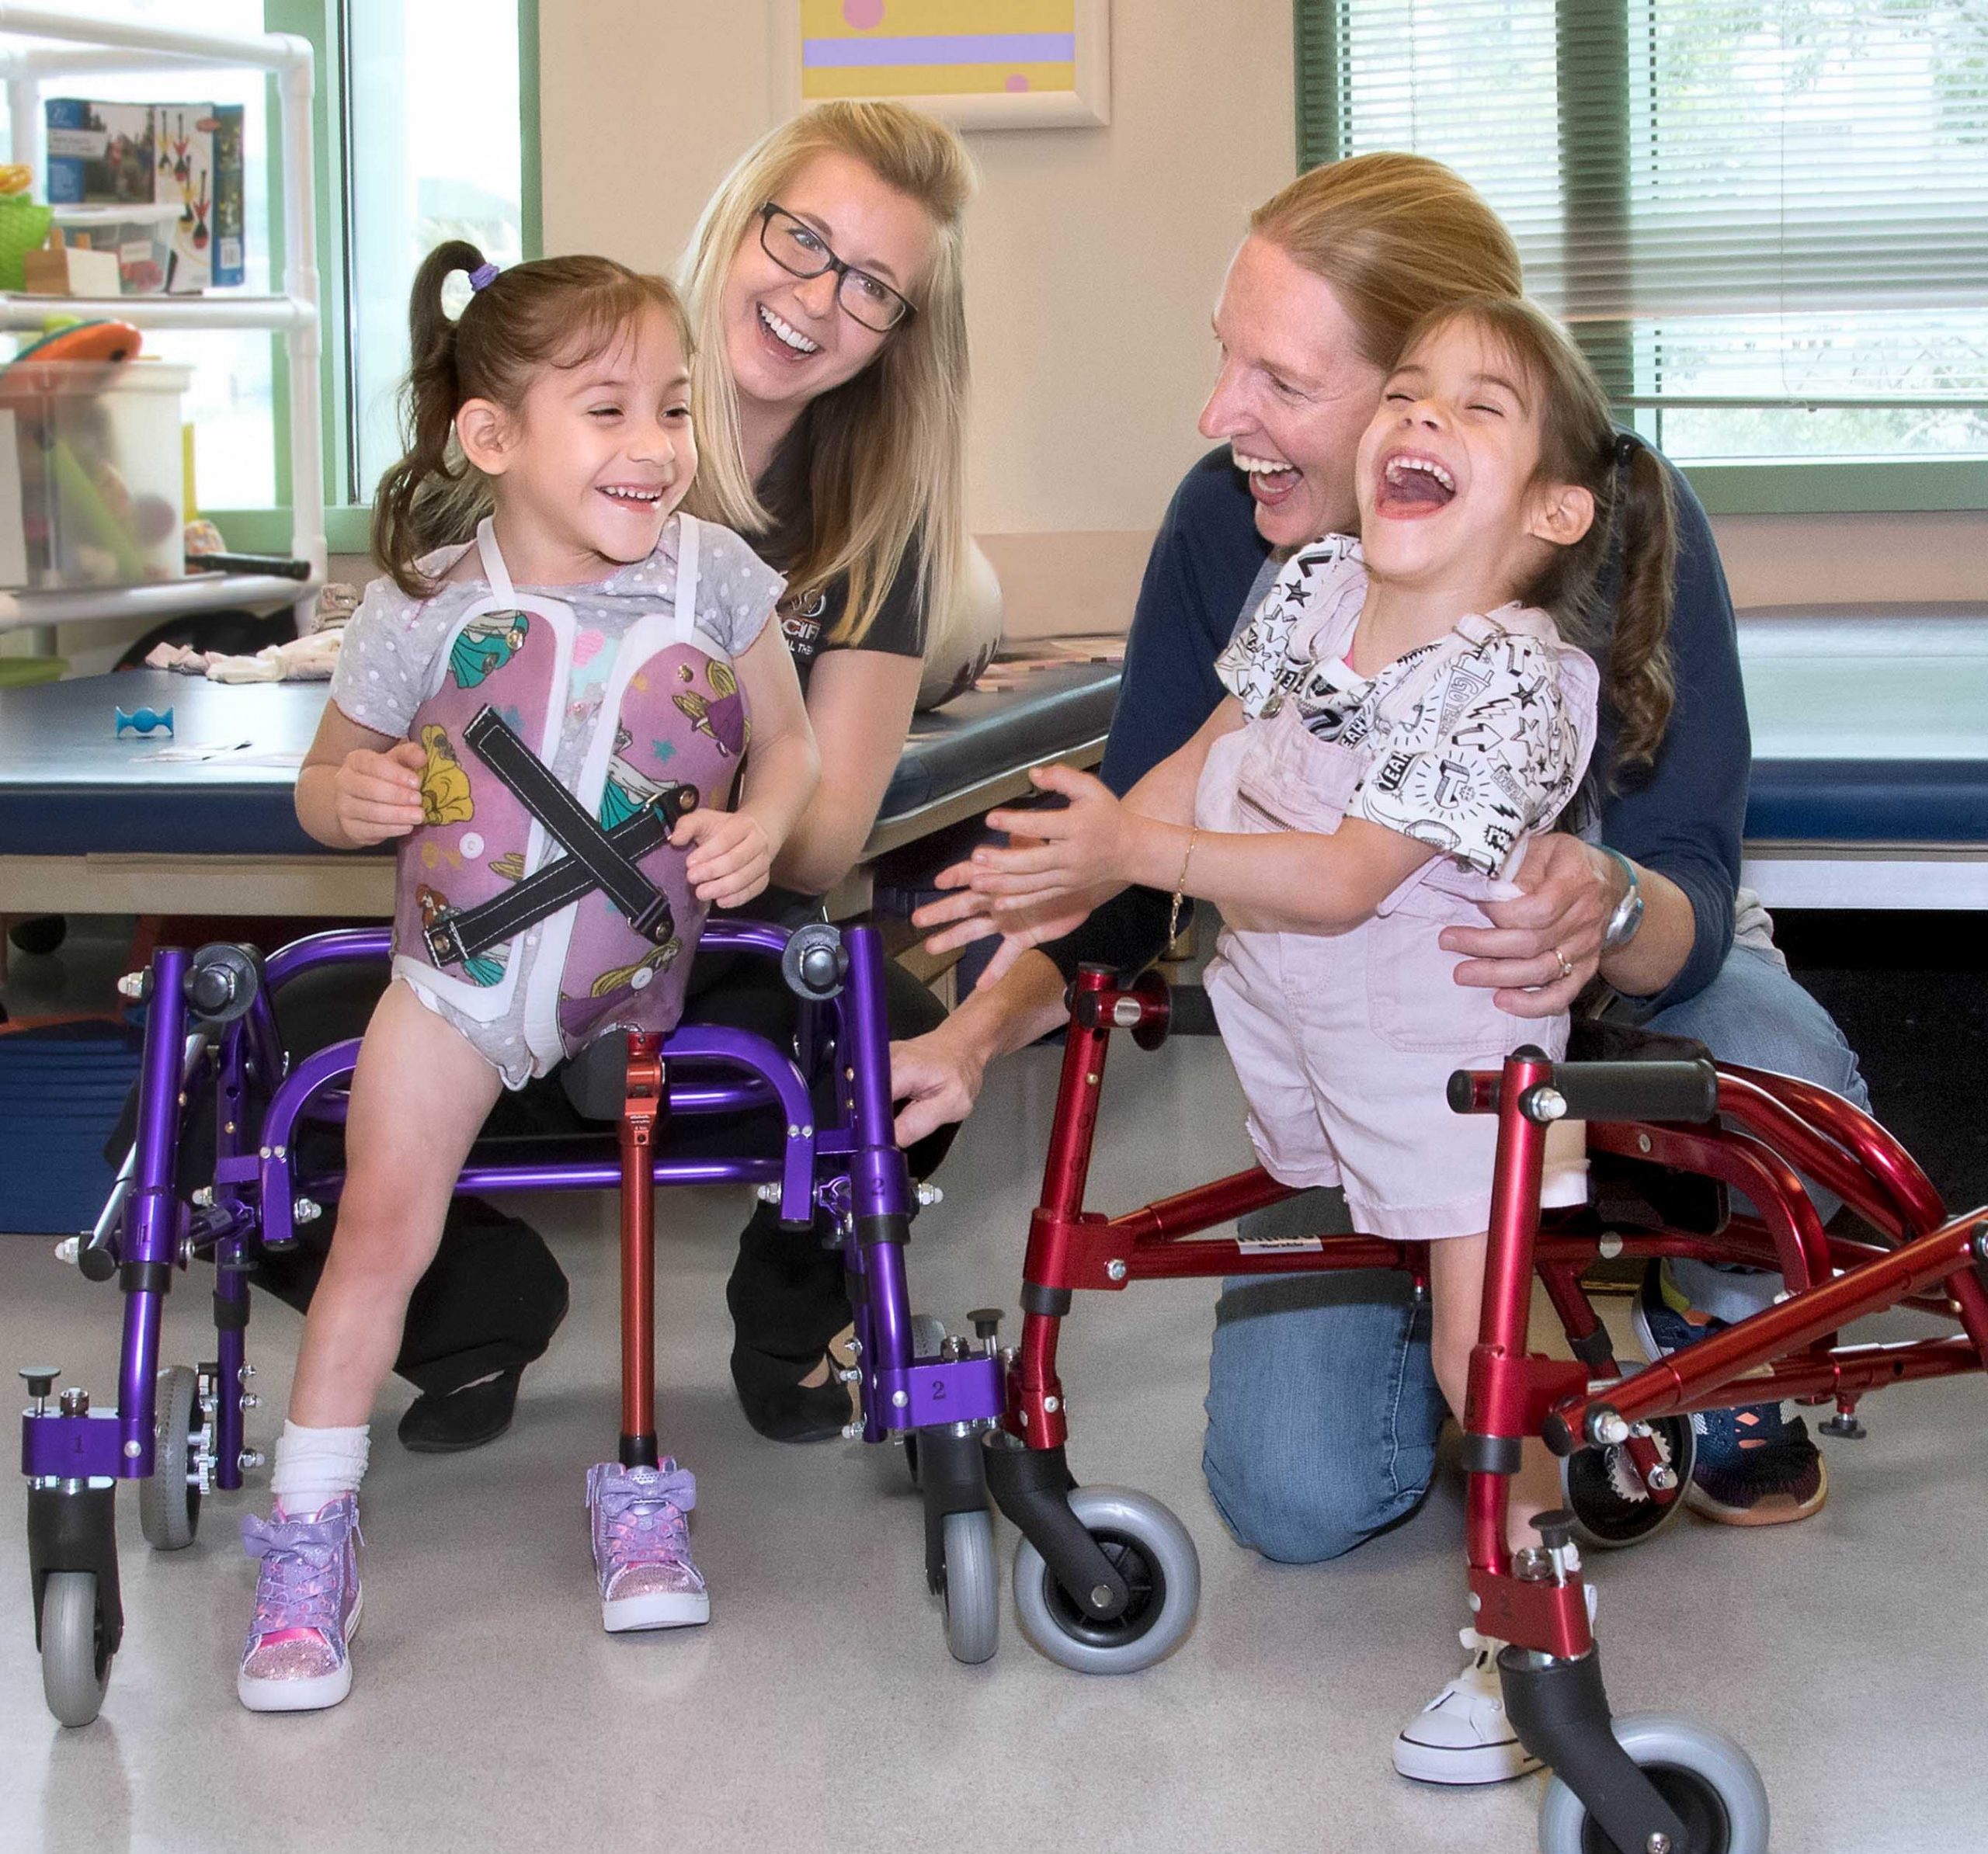 Eva and Erika - former conjoined twins smiling